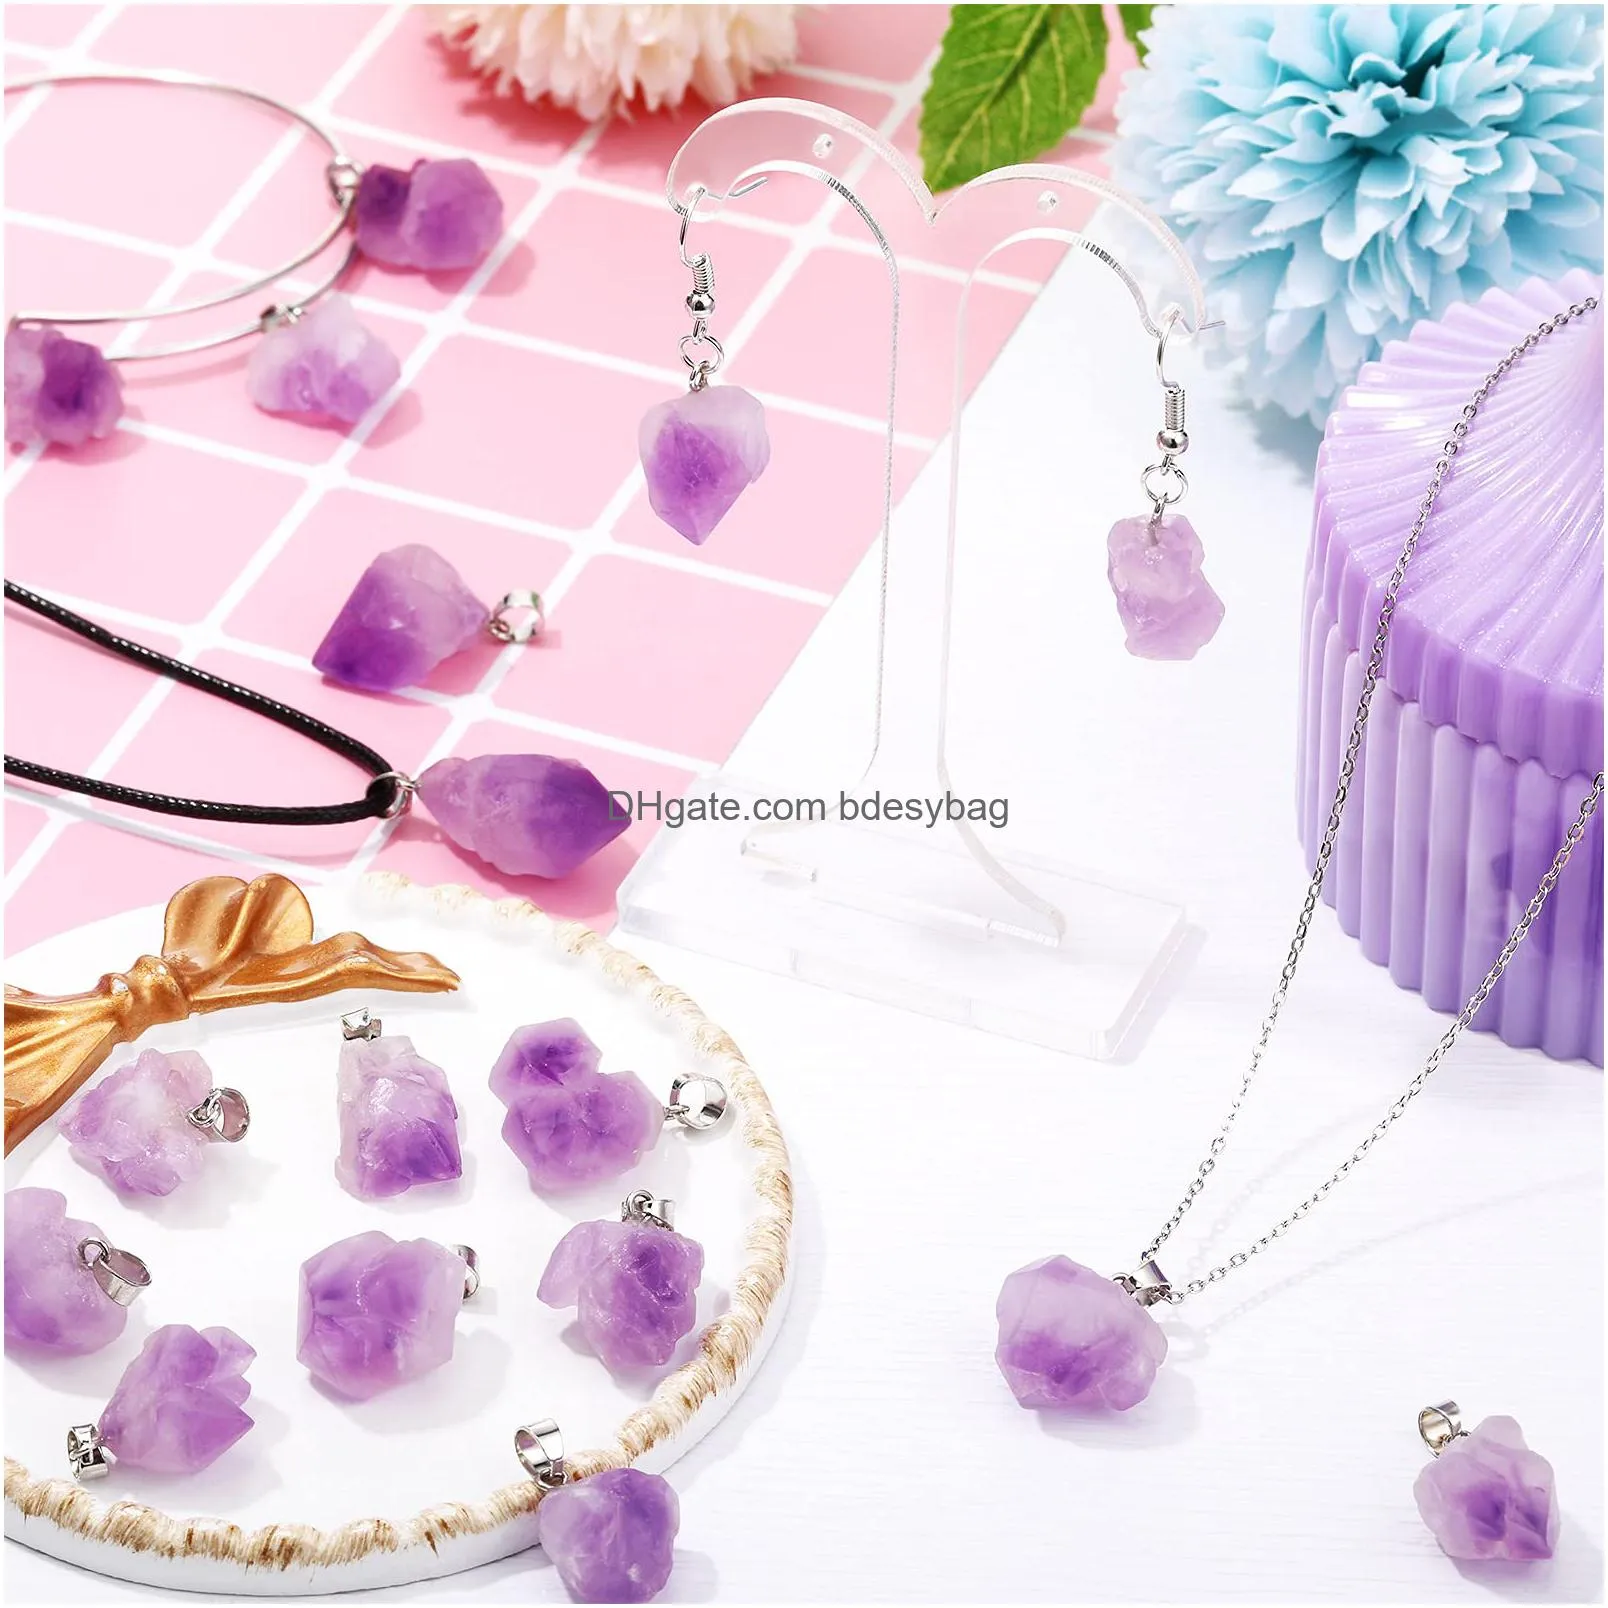 natural amethyst stone irregular rock pendant healing crystal chakra gemstone charm with stainless steel snap for necklace earring bracelet jewelry making hole 5 x 2.5 mm 